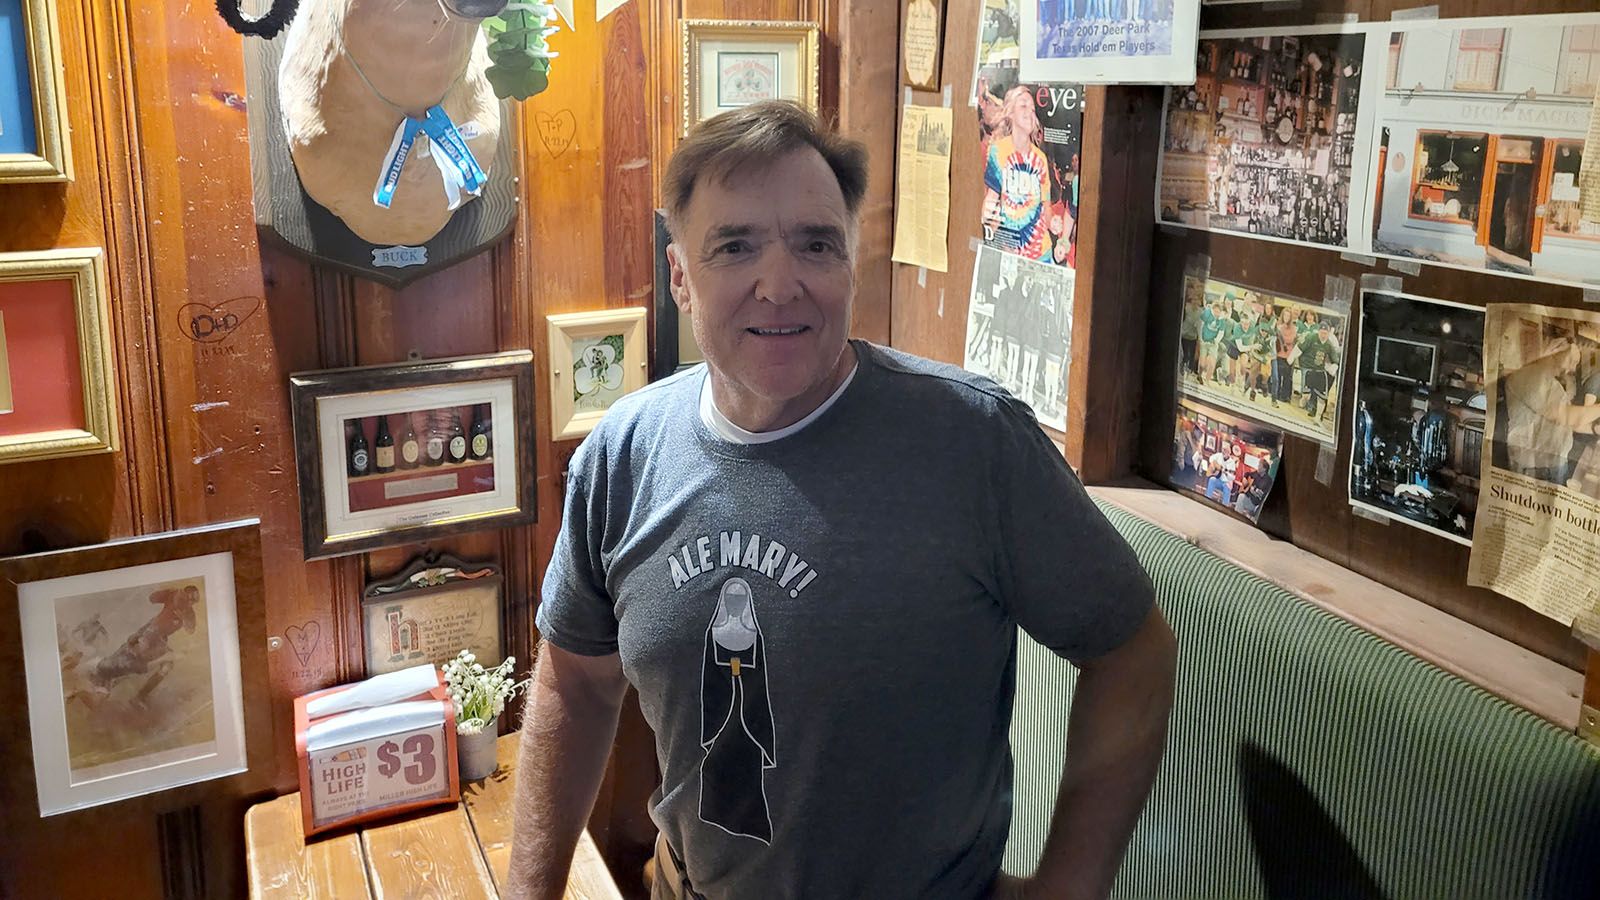 Tony Henry will mark 25 years of owning Deer Park Irish Pub with a Customer Appreciation Day on June 24.